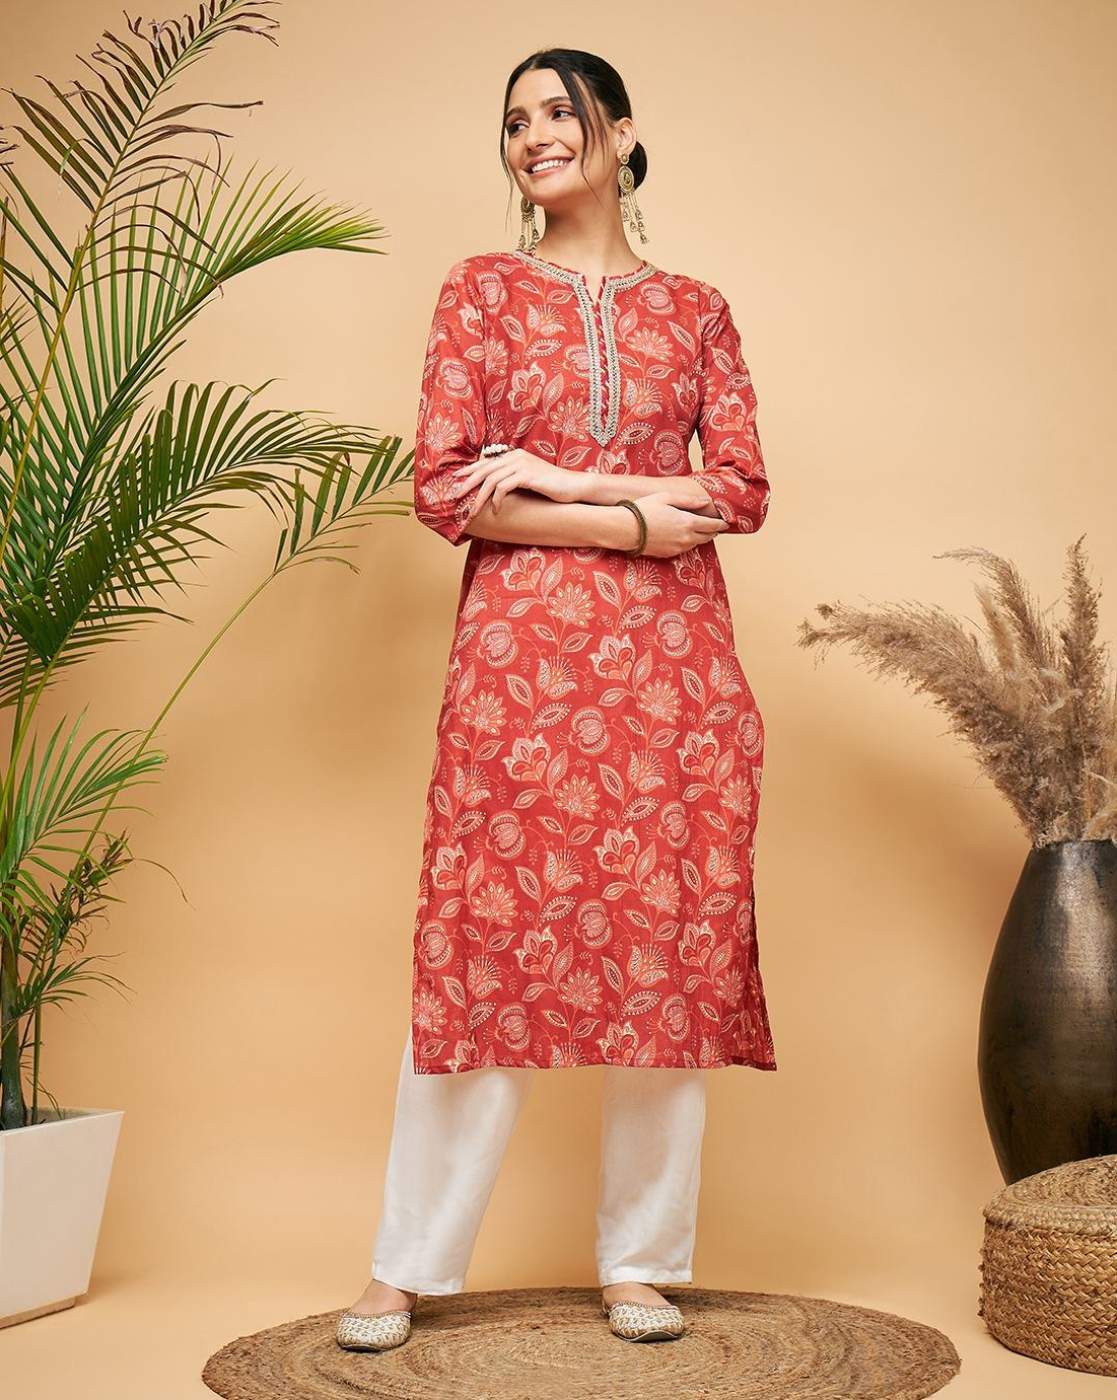 Ethnicwear Start-up Rustorange Betting Big on D2C Business Model For Growth  And Consumer Connect | Apparel Resources